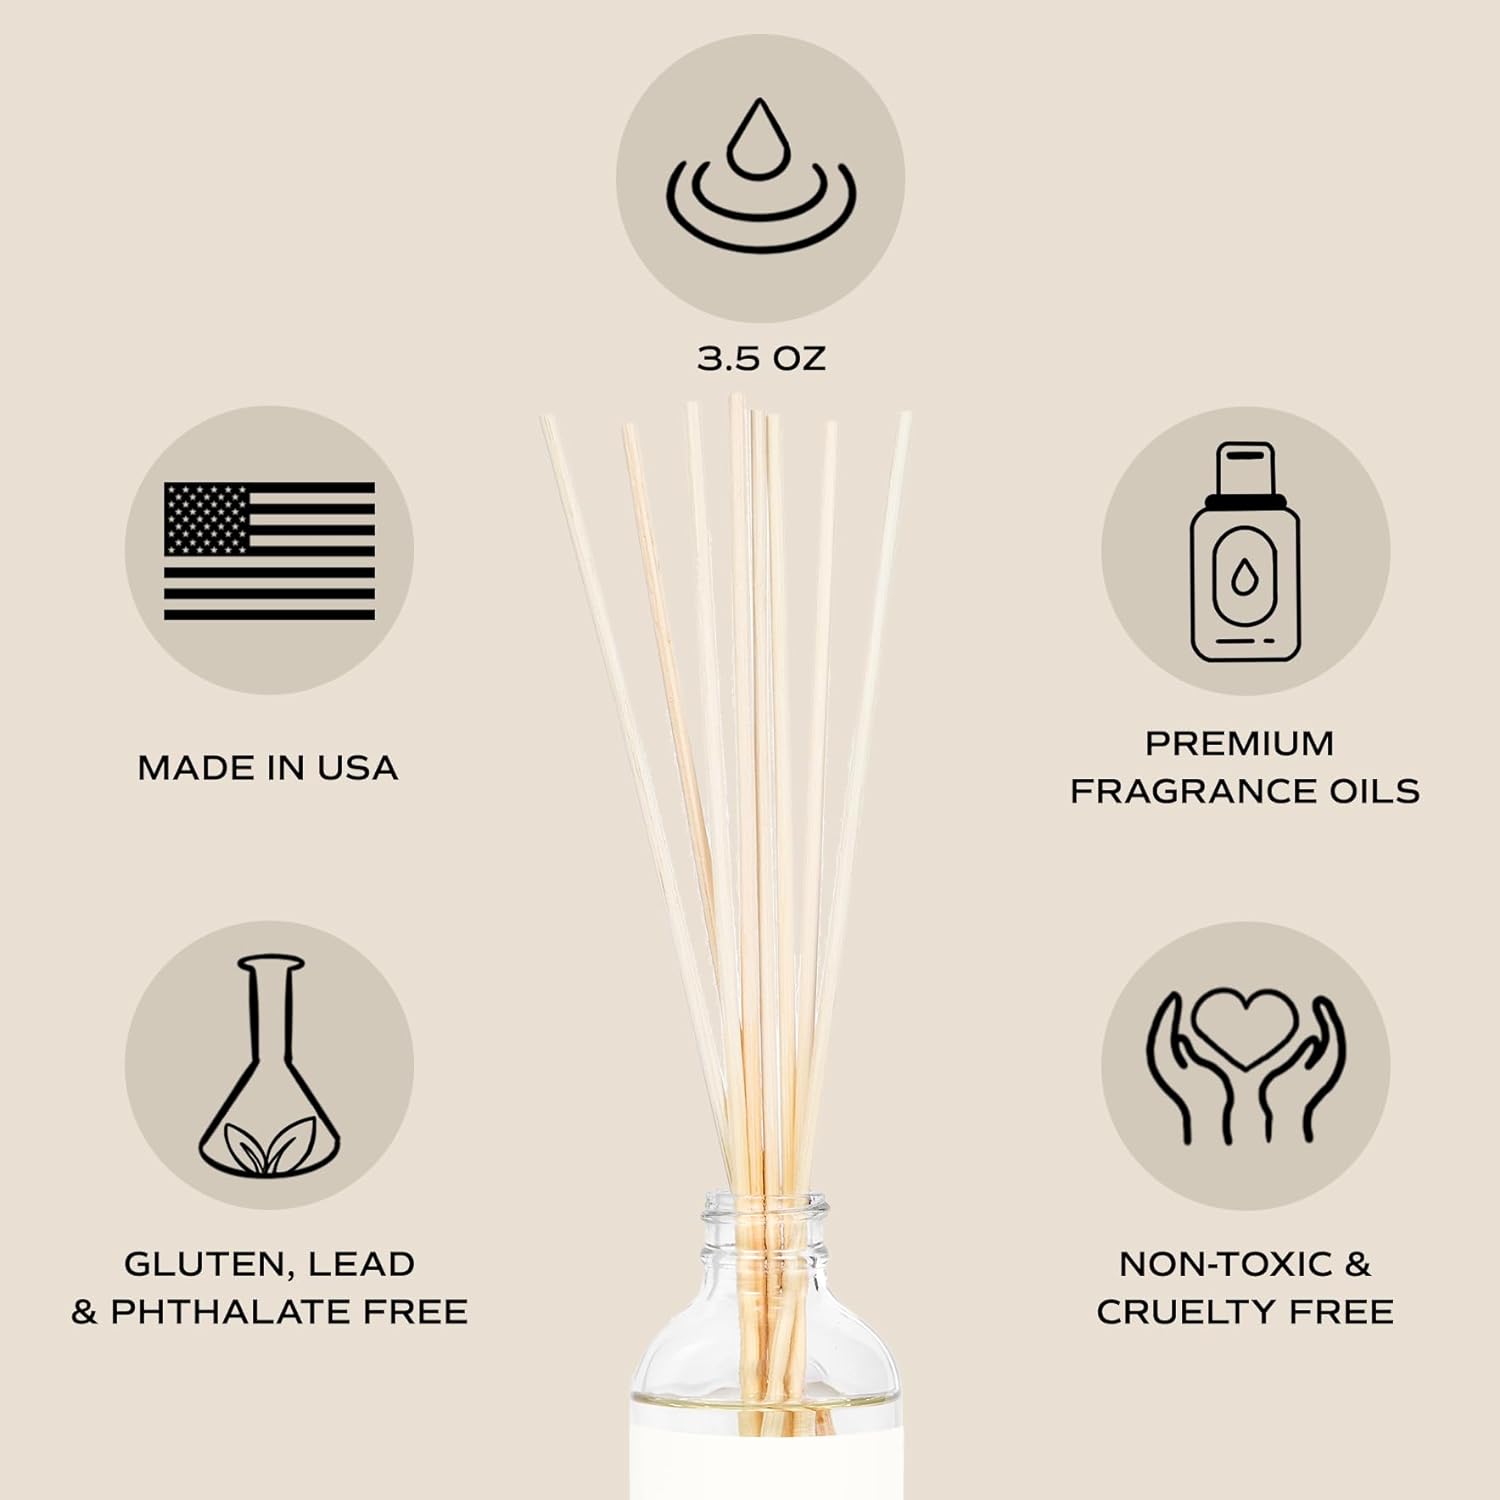 Sweet Water Decor Salt & Sea Reed Diffuser Set - Sea Salt Citrus & Musk Amber Scent Diffuser - Reed Diffusers for Home with Long Lasting Fragrance - Non-Toxic Oil Reed Diffuser - Made in the USA